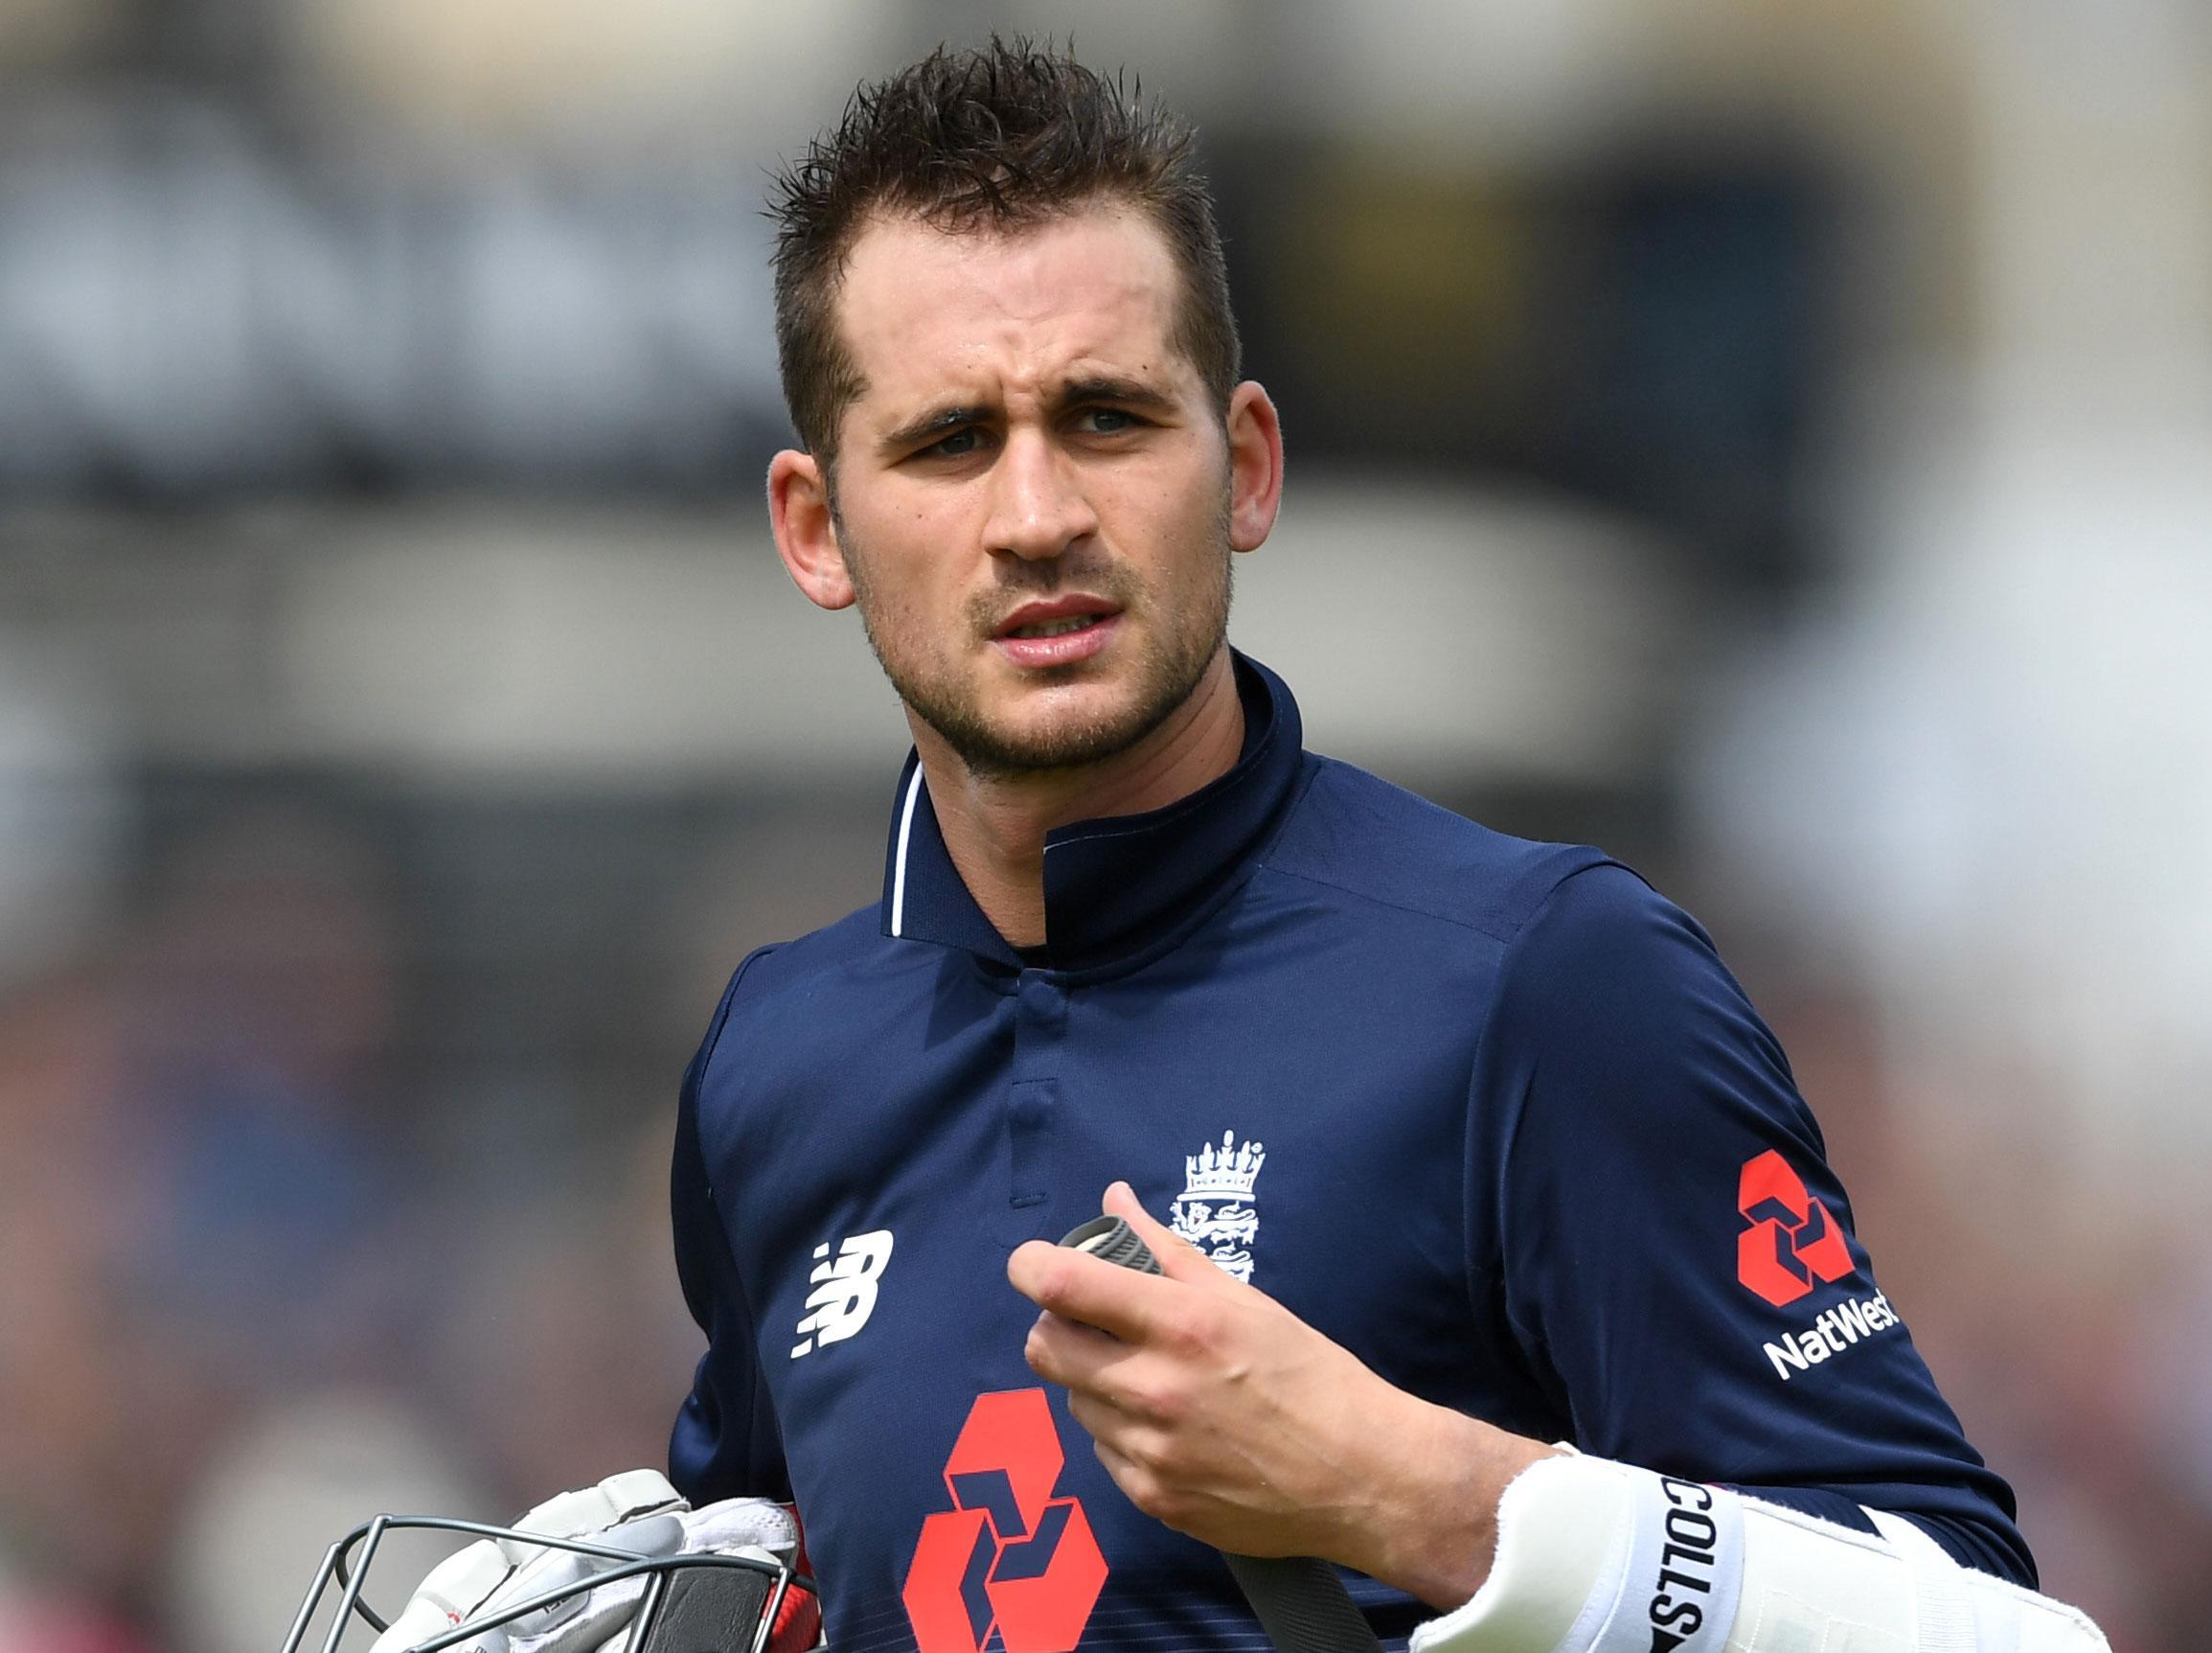 Alex Hales has turned his back on red ball cricket